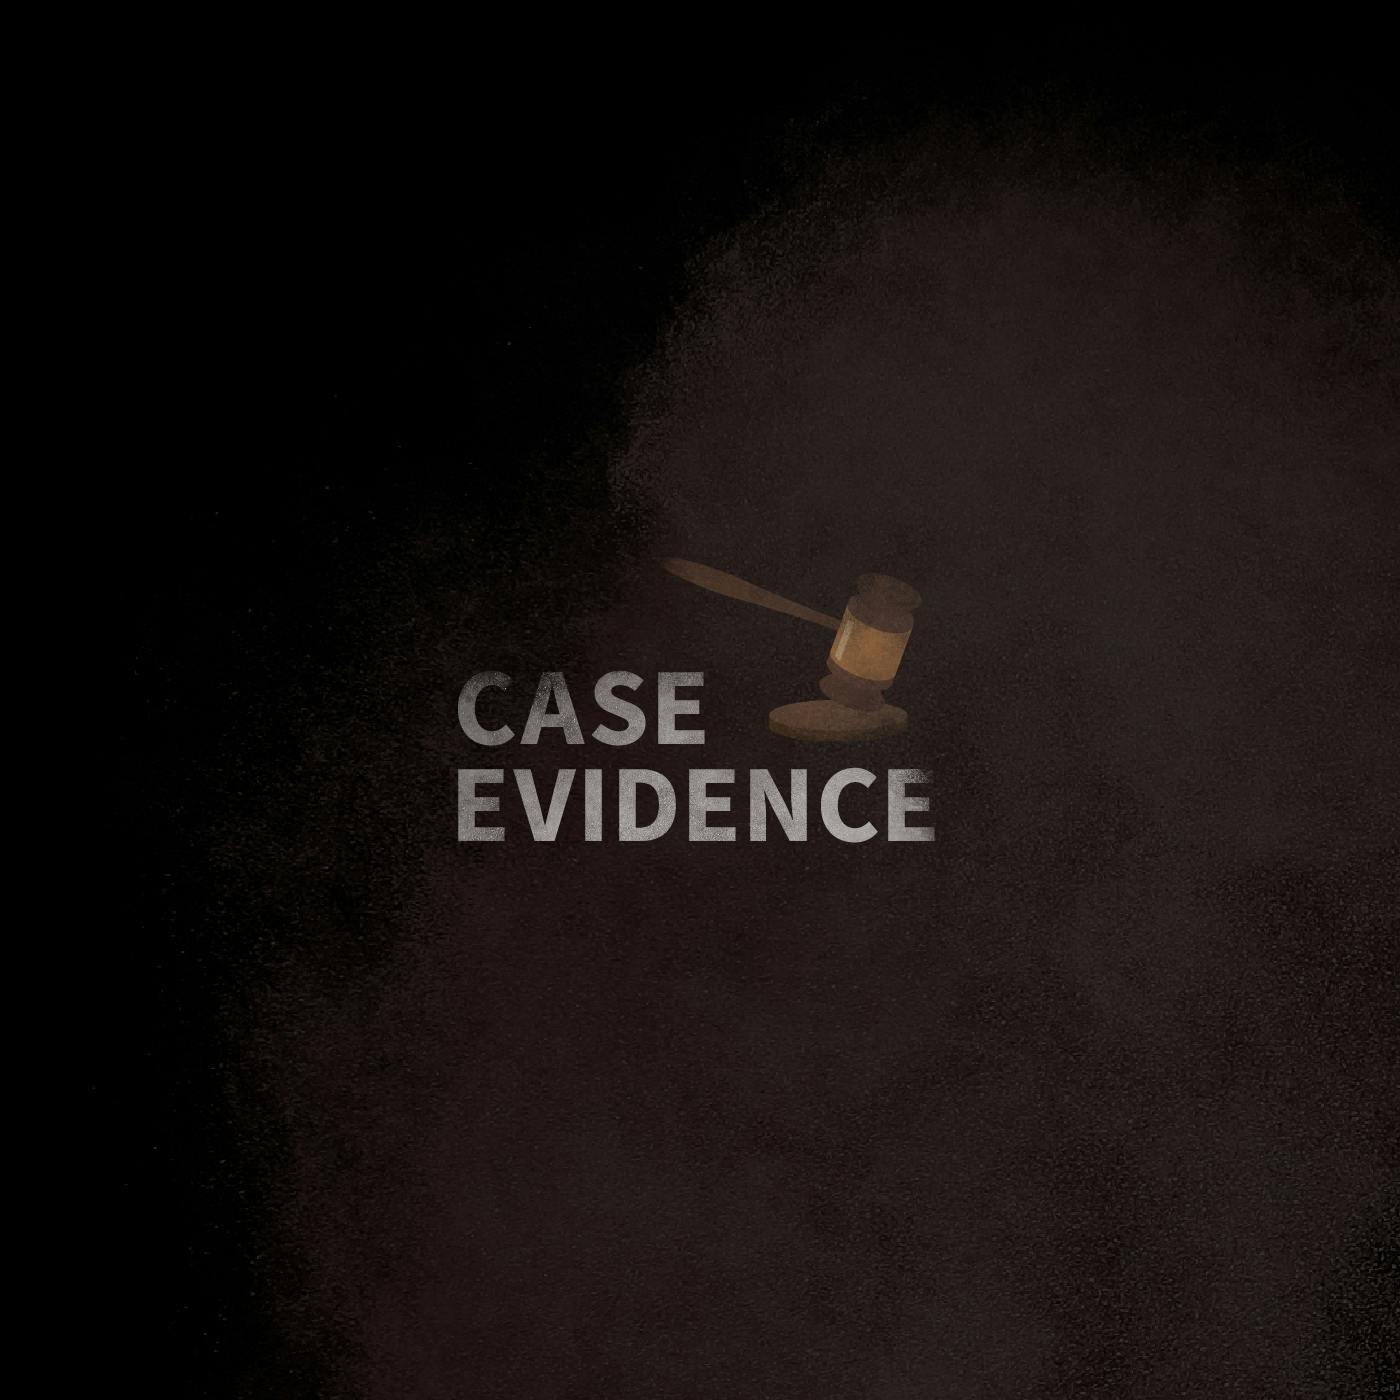 Case Evidence 05.01.17 by Tenderfoot TV